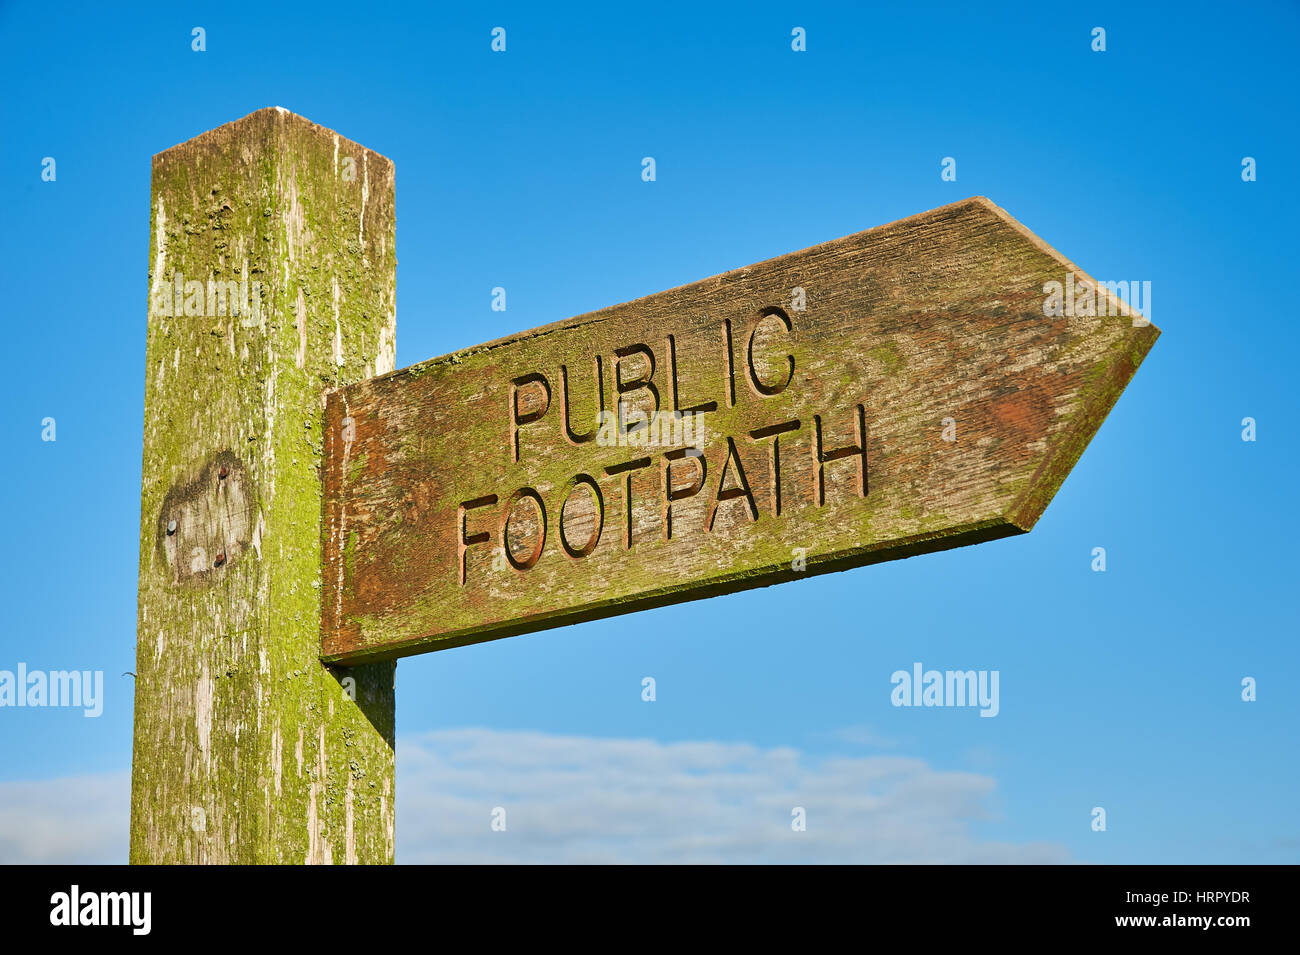 A timber fingerpost sign indicating a public footpath right of way, against a blue sky. Stock Photo